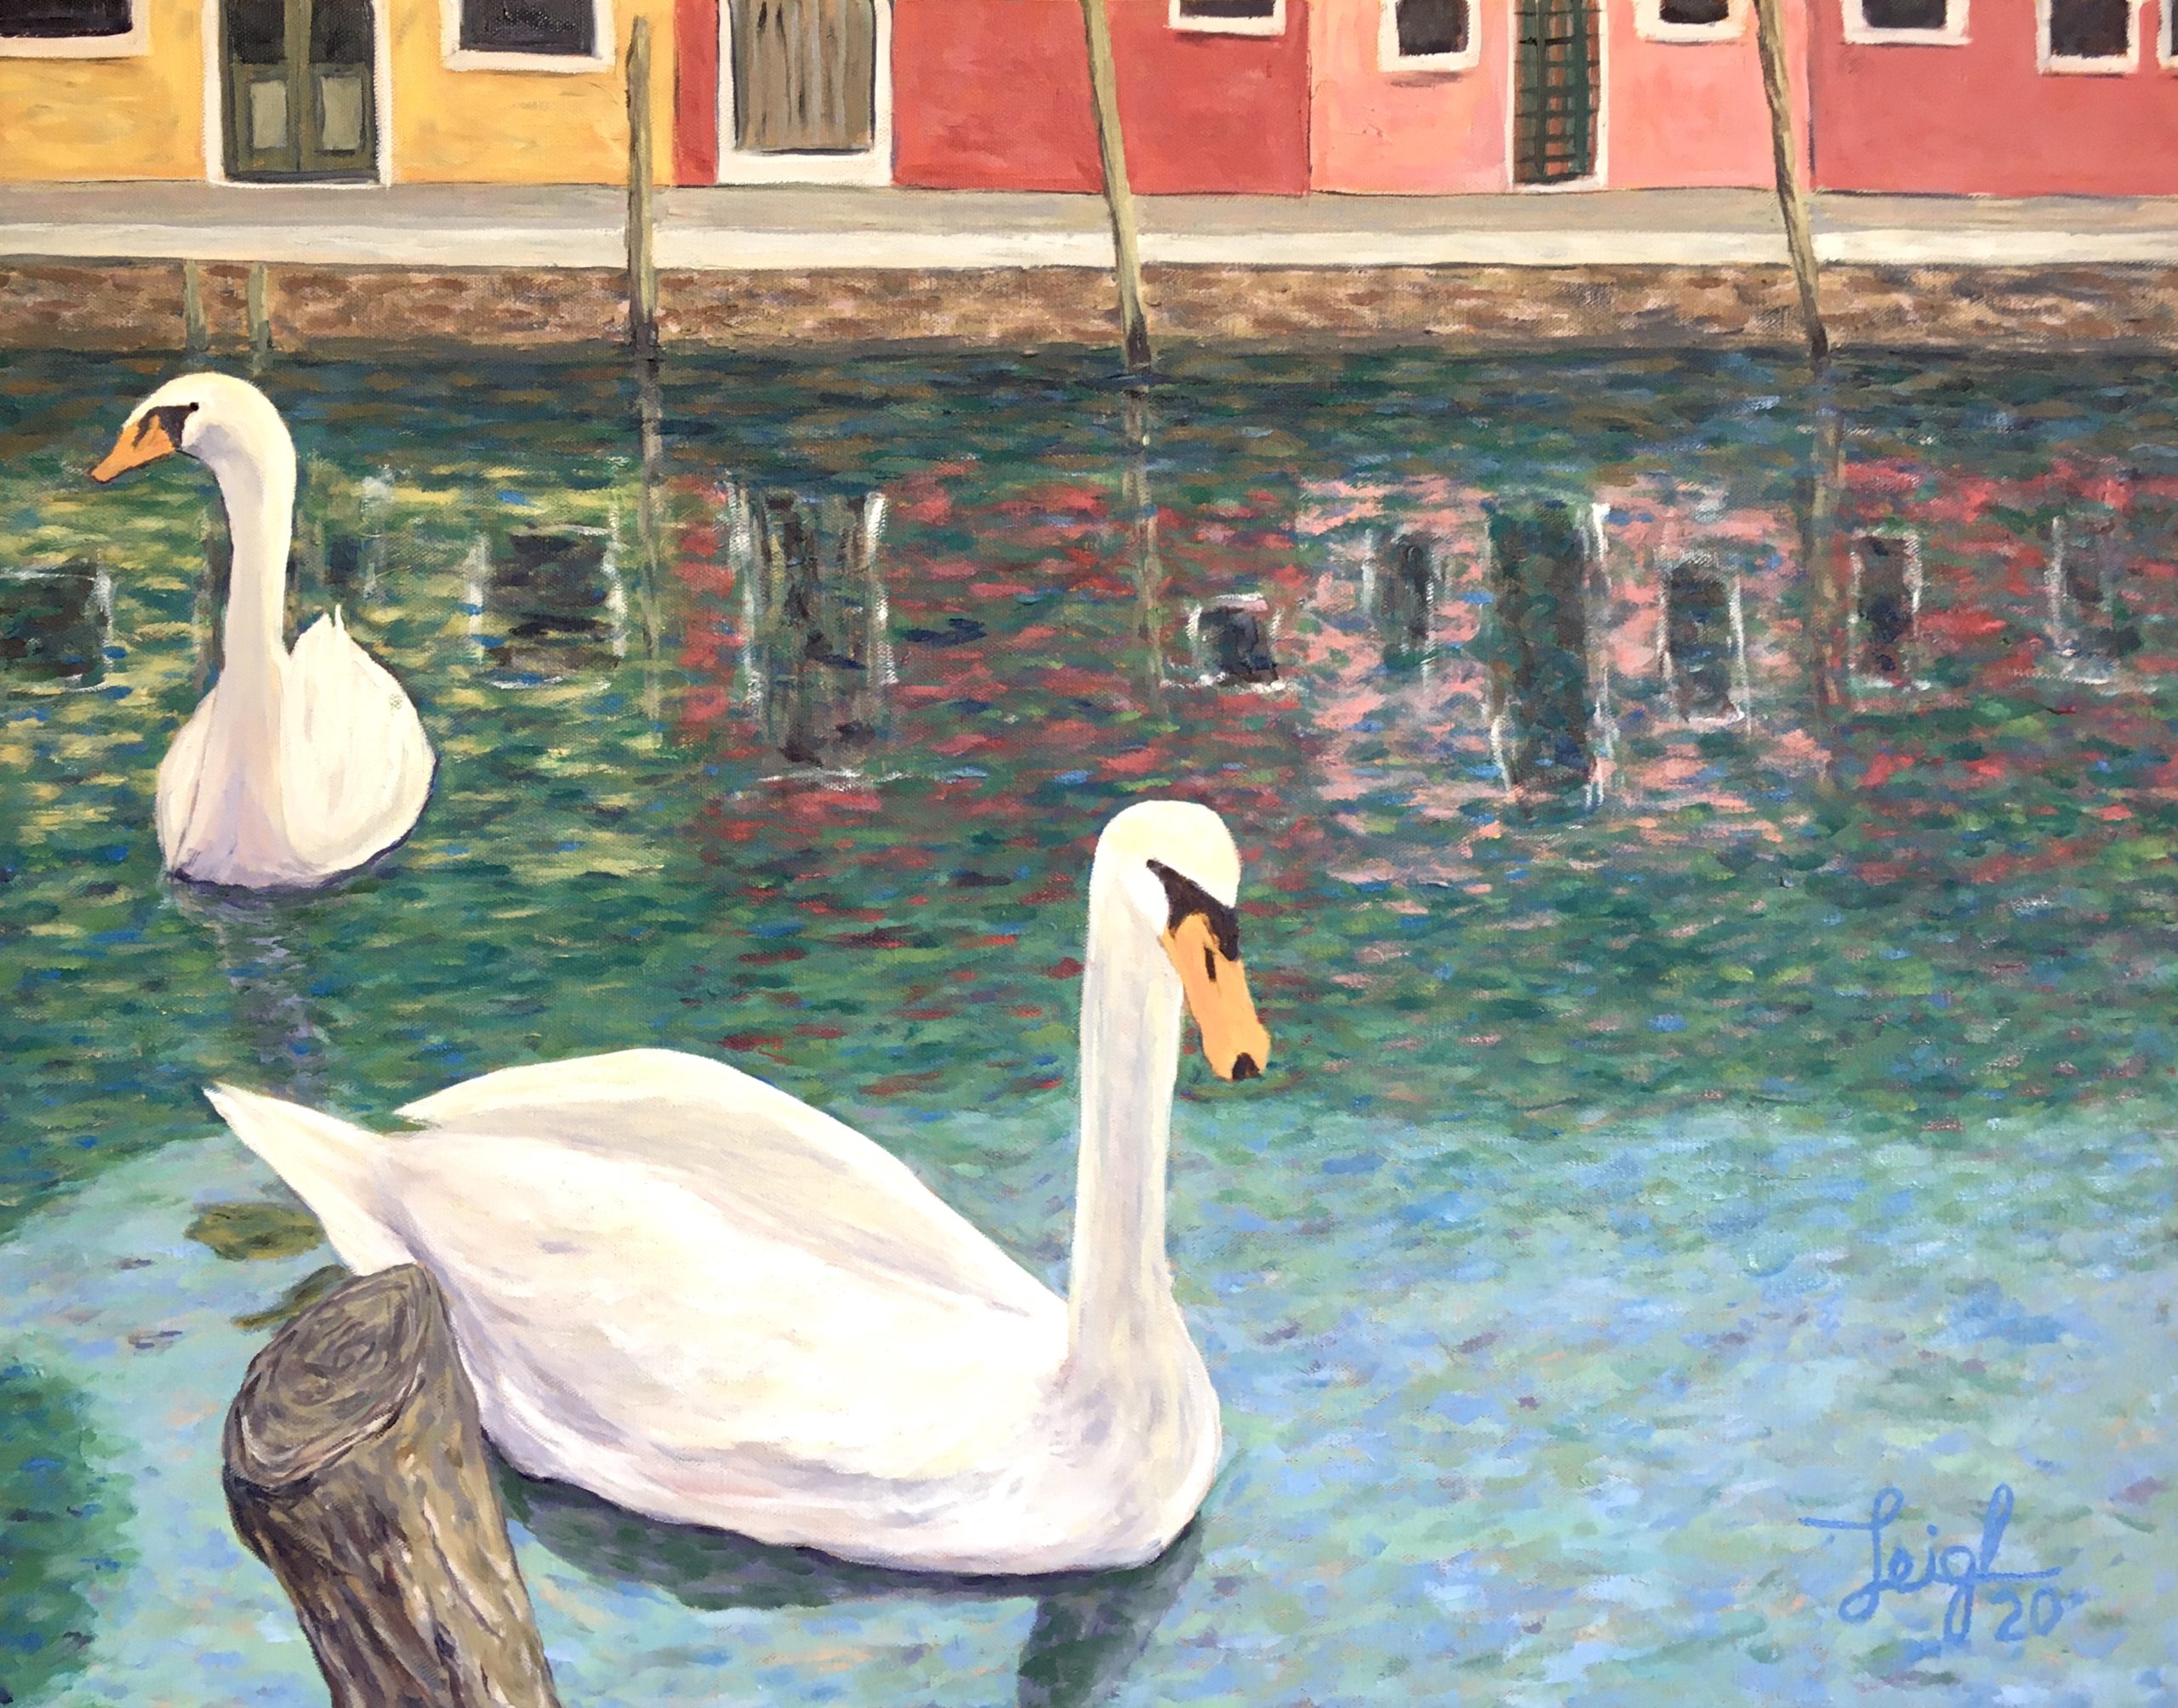 Swans in a Pandemic (#10)  ~ 
Jim & Luanna Quirk, Carlsbad, CA  28 x 22  •  2020